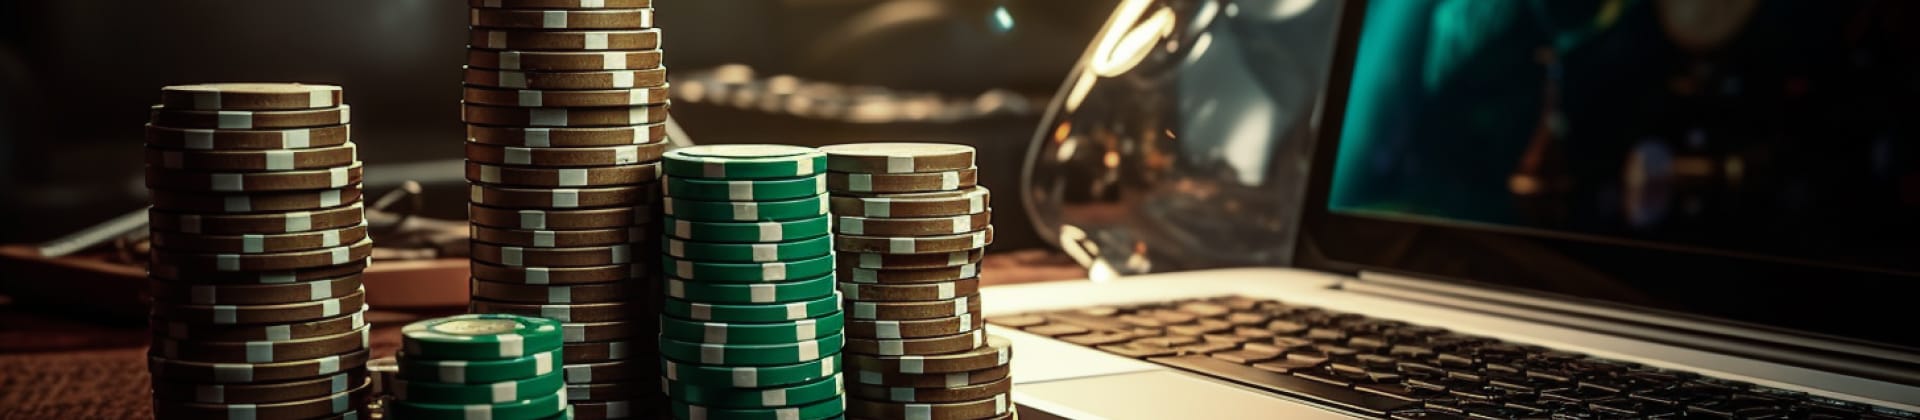 Frequently asked questions about real money online casinos